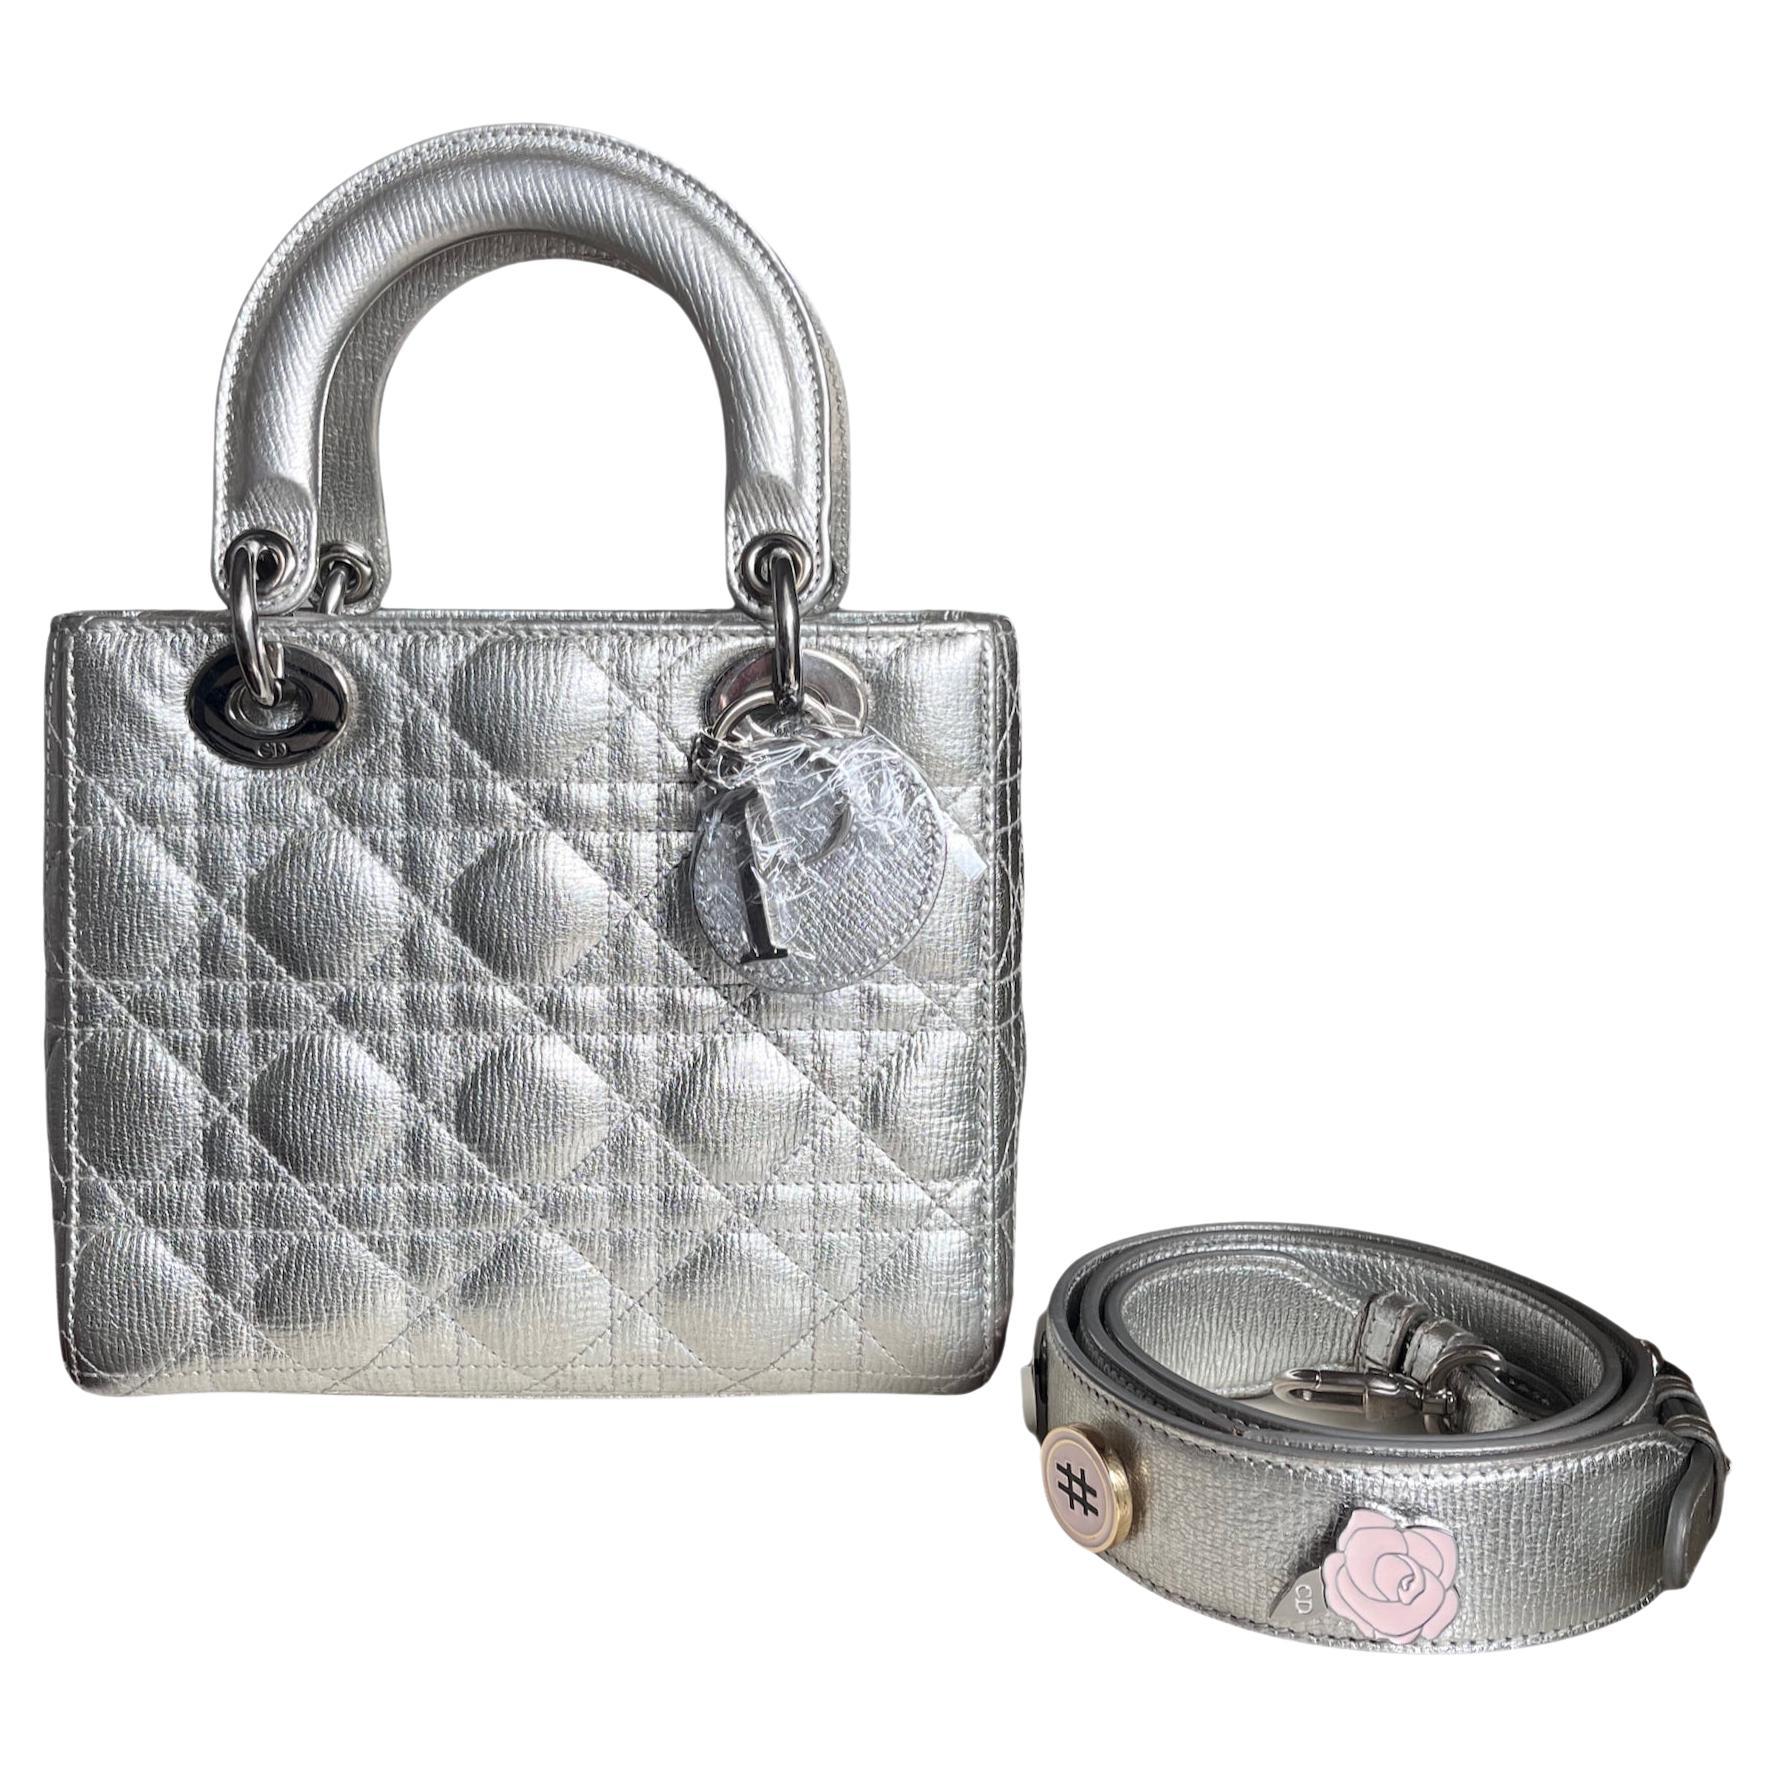 Lady Dior ABCdior Small Silver Cannage Lambskin Handbag with Strap For Sale